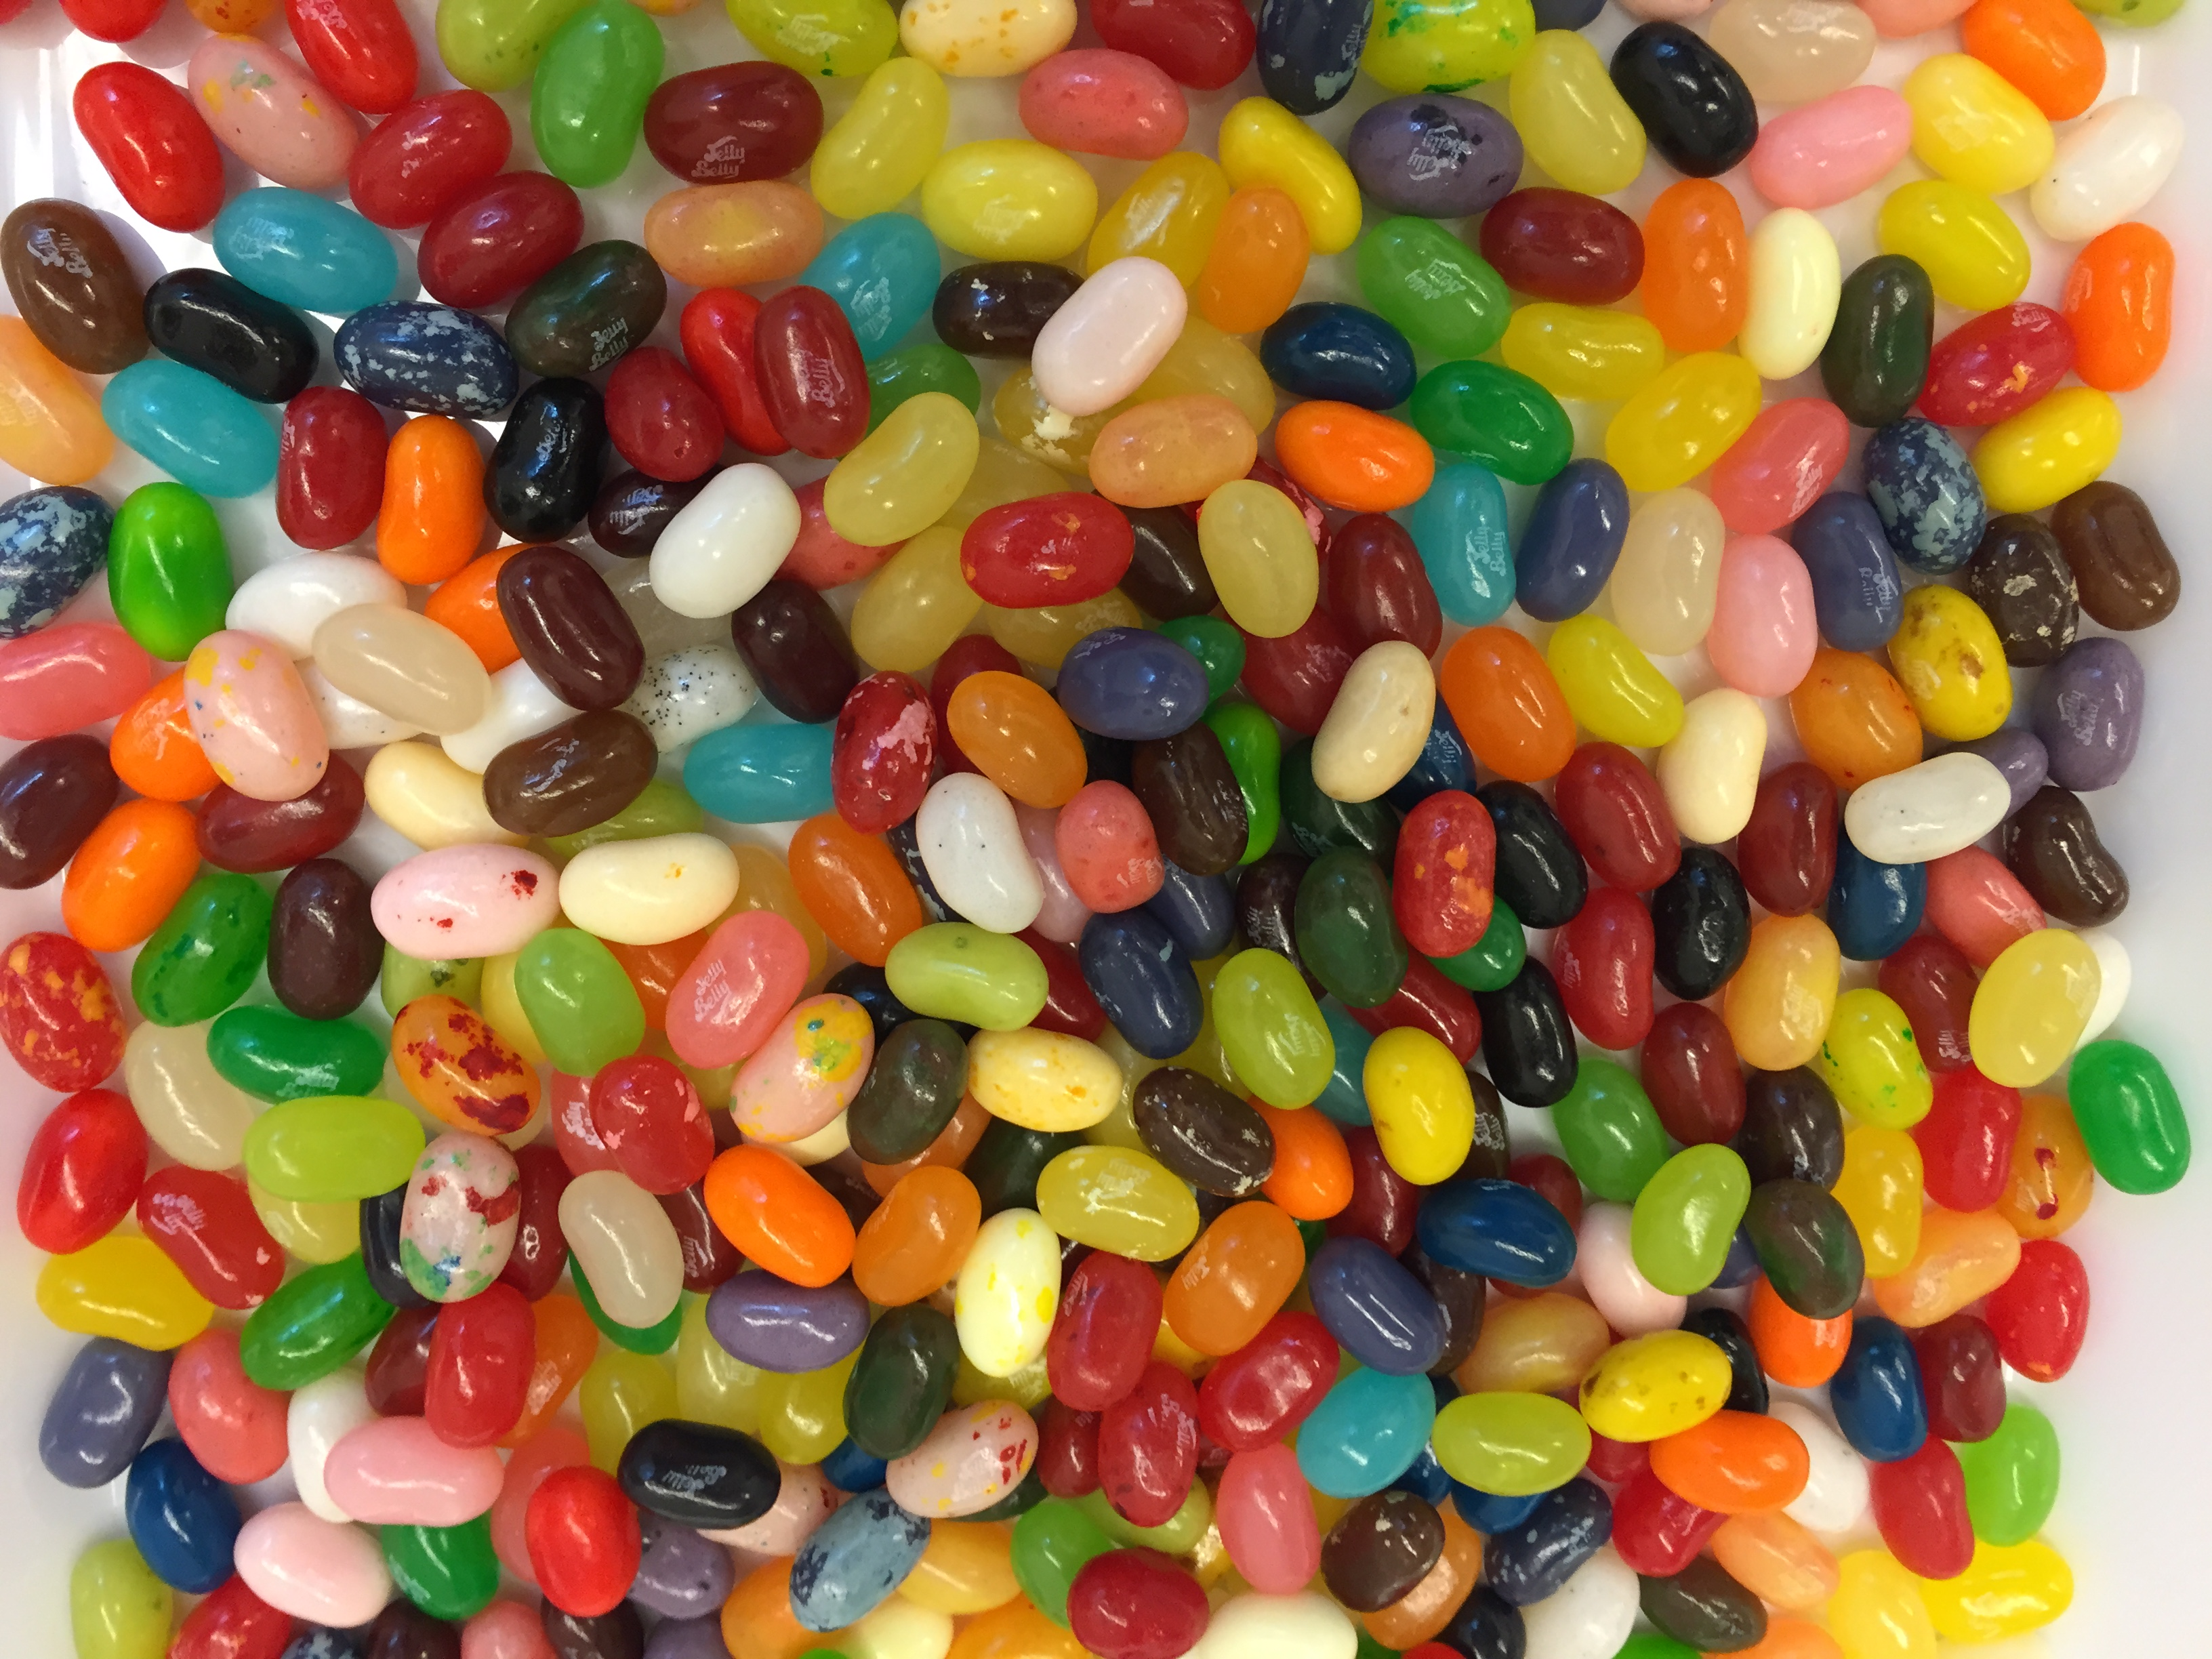 Brain Awareness with Jelly Beans!